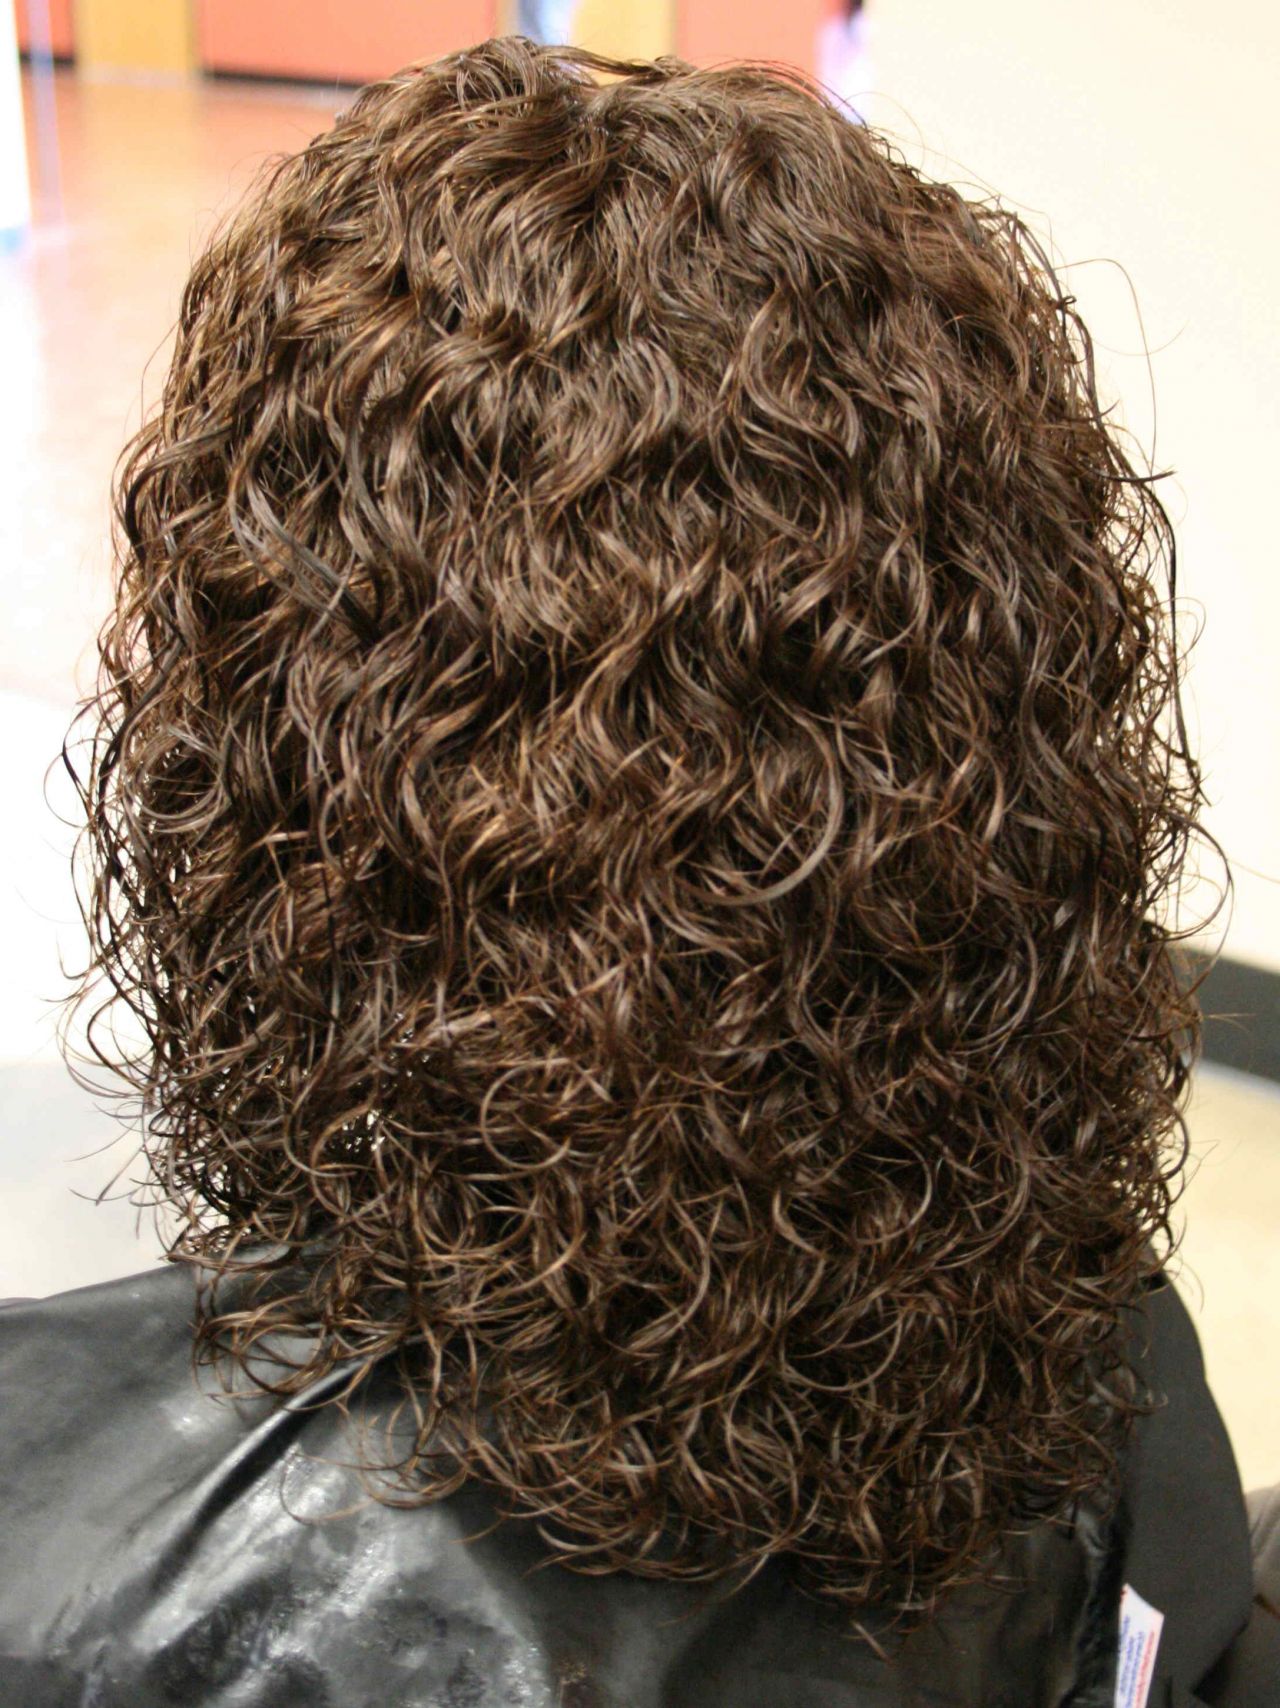 22 sorts of Spiral perm - HairStyles for Women